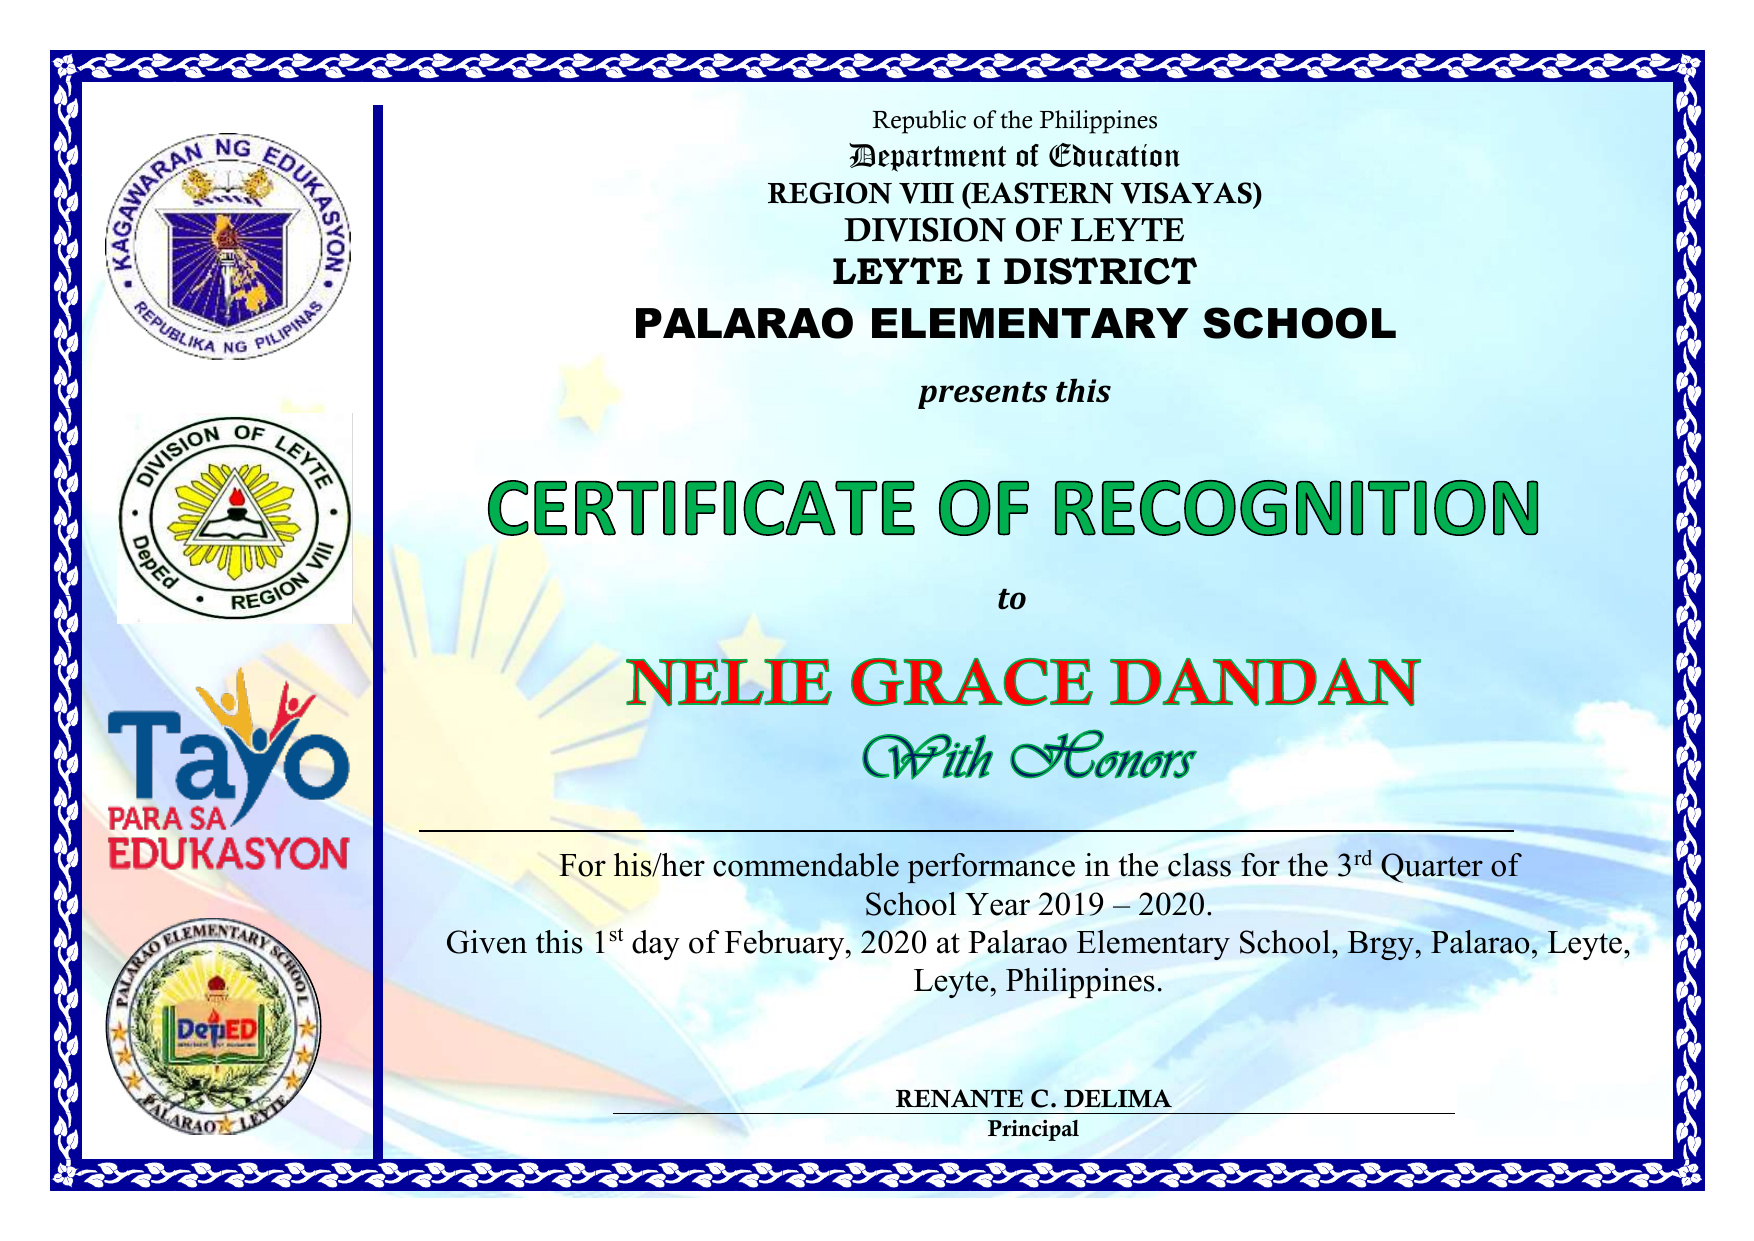 deped-certificate-of-recognition-template-free-download-printable-unamed